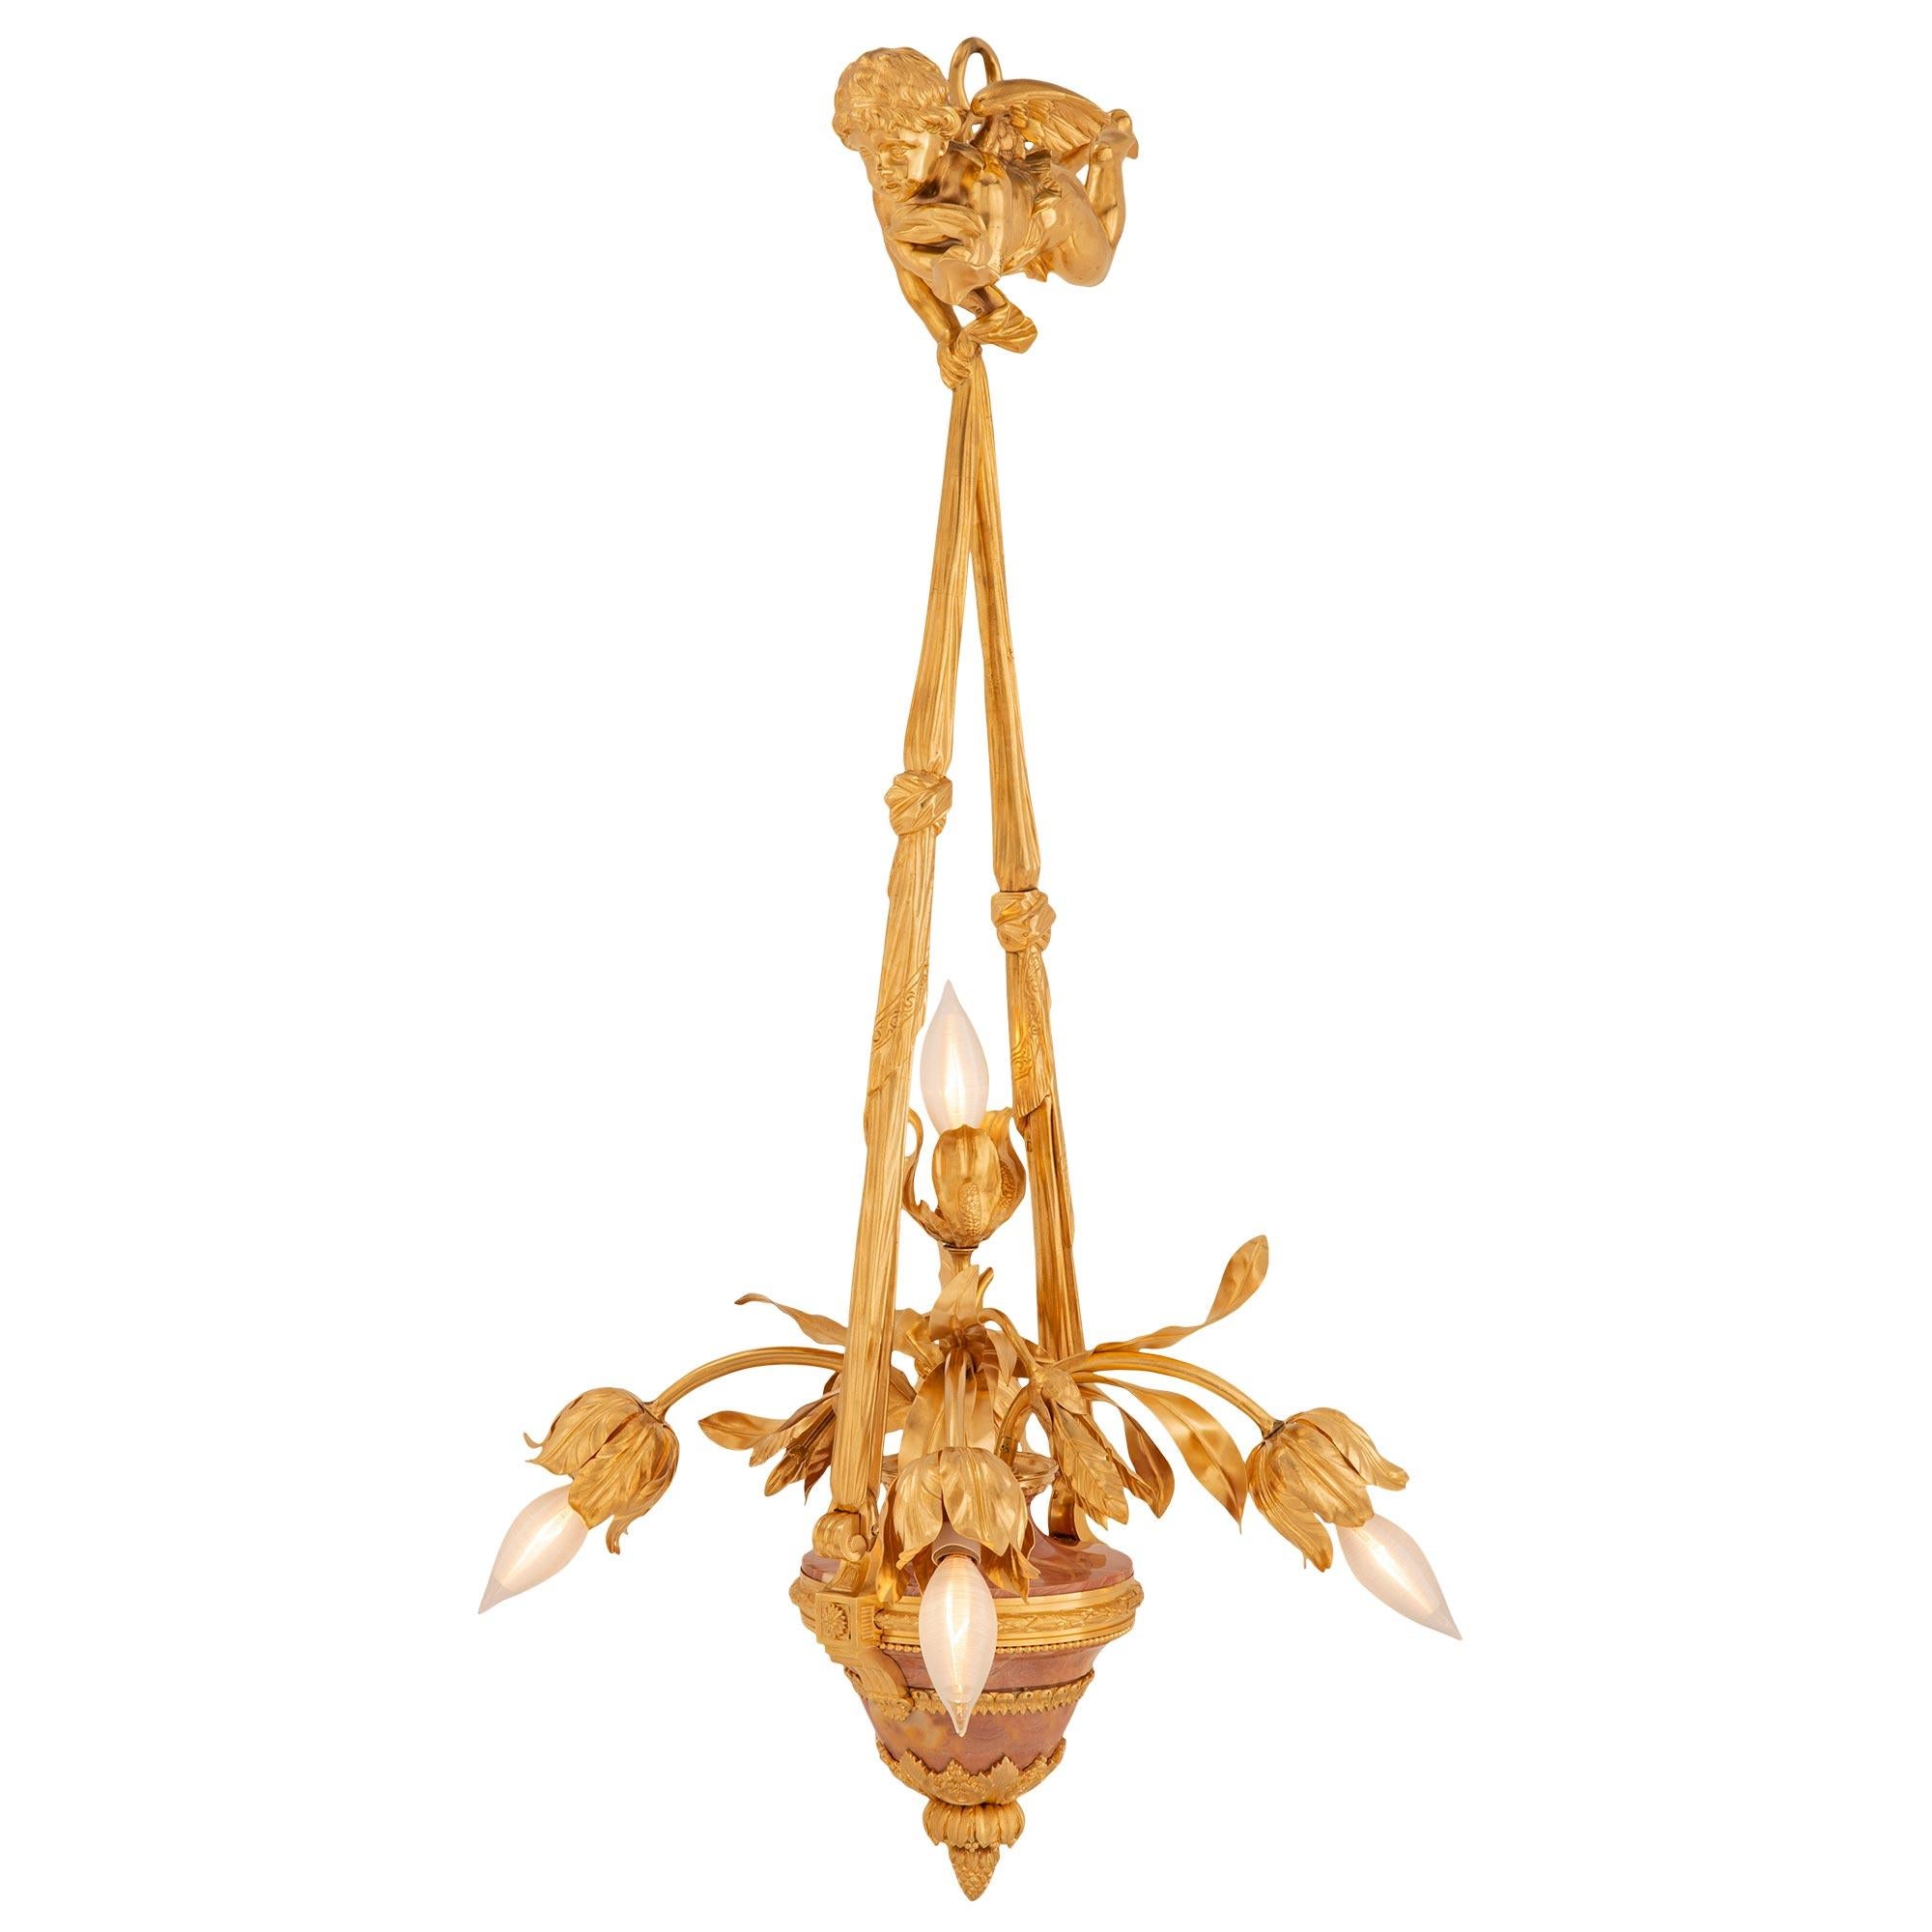 An exquisite and most decorative French 19th century Louis XVI Belle Époque period ormolu and marble chandelier. The five arm chandelier with lovely subject matter is centered by a bottom richly chased acorn finial amidst lovely finely detailed